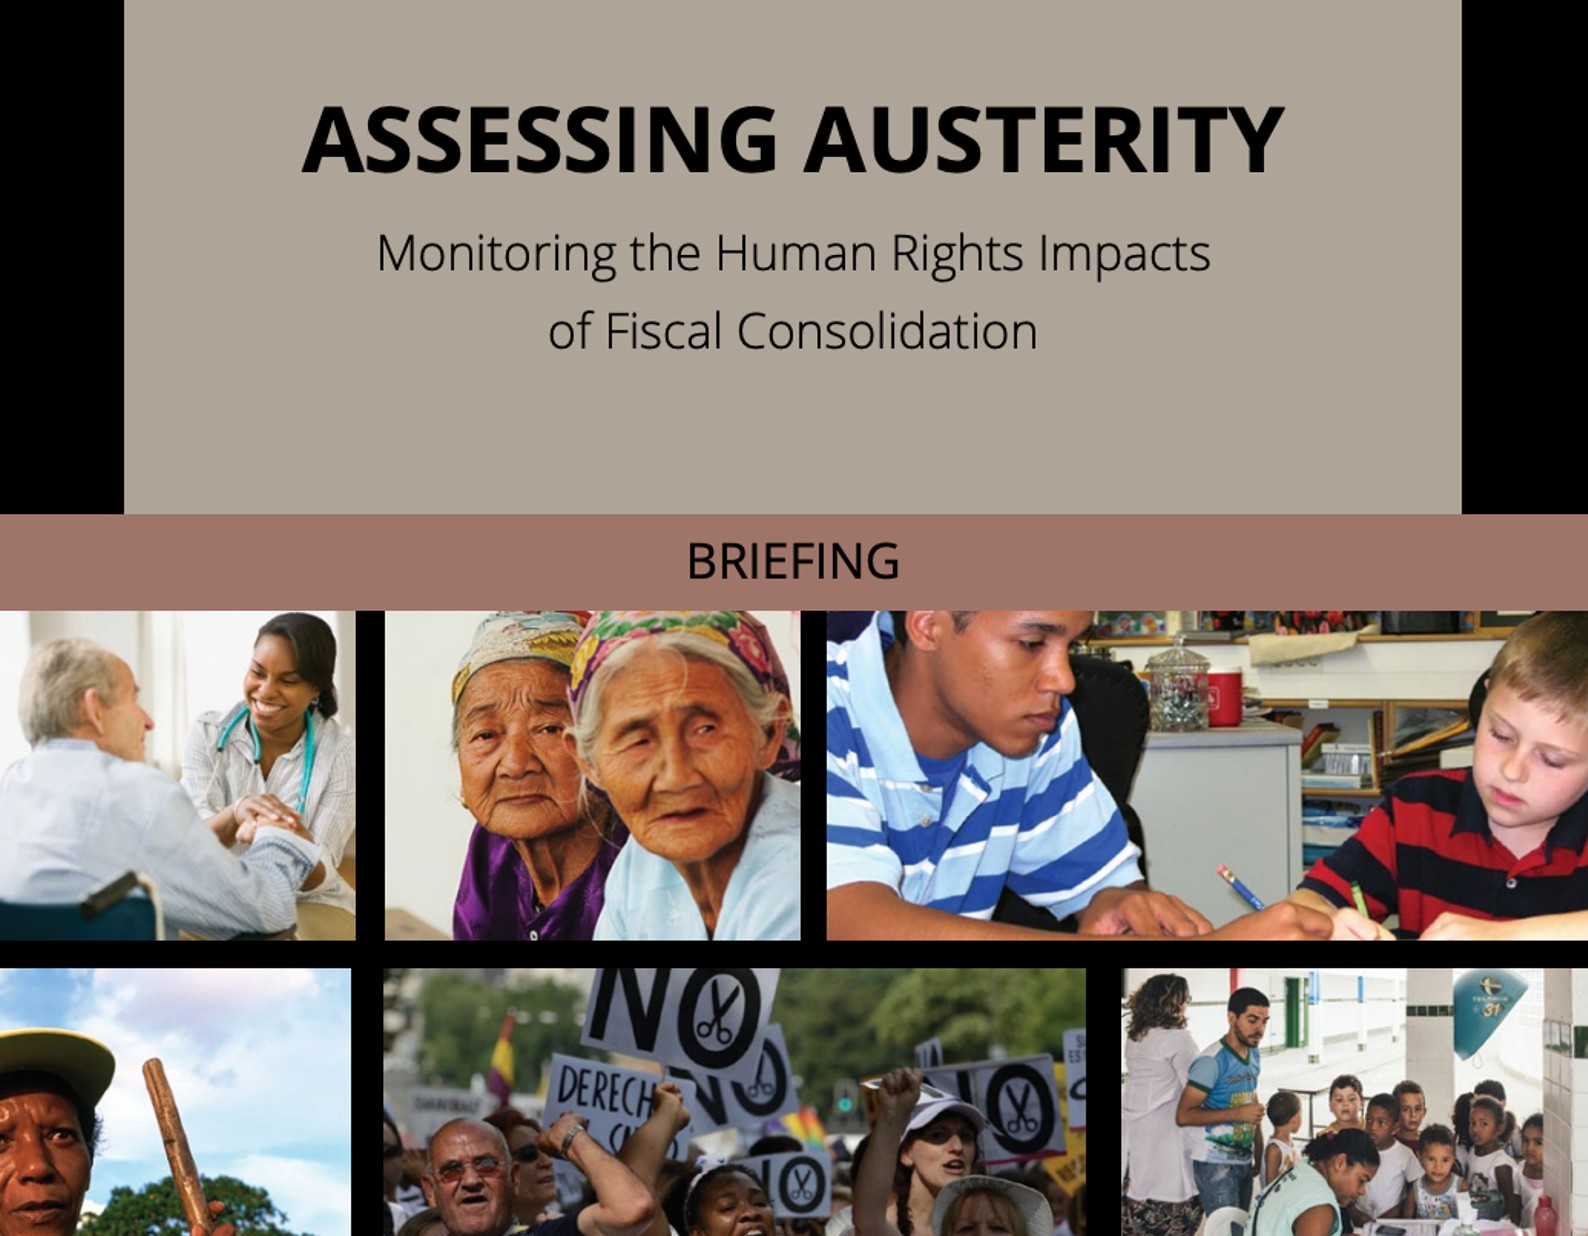 Assessing Austerity: Monitoring the Human Rights Impacts of Fiscal Consolidation - Report by CESR org